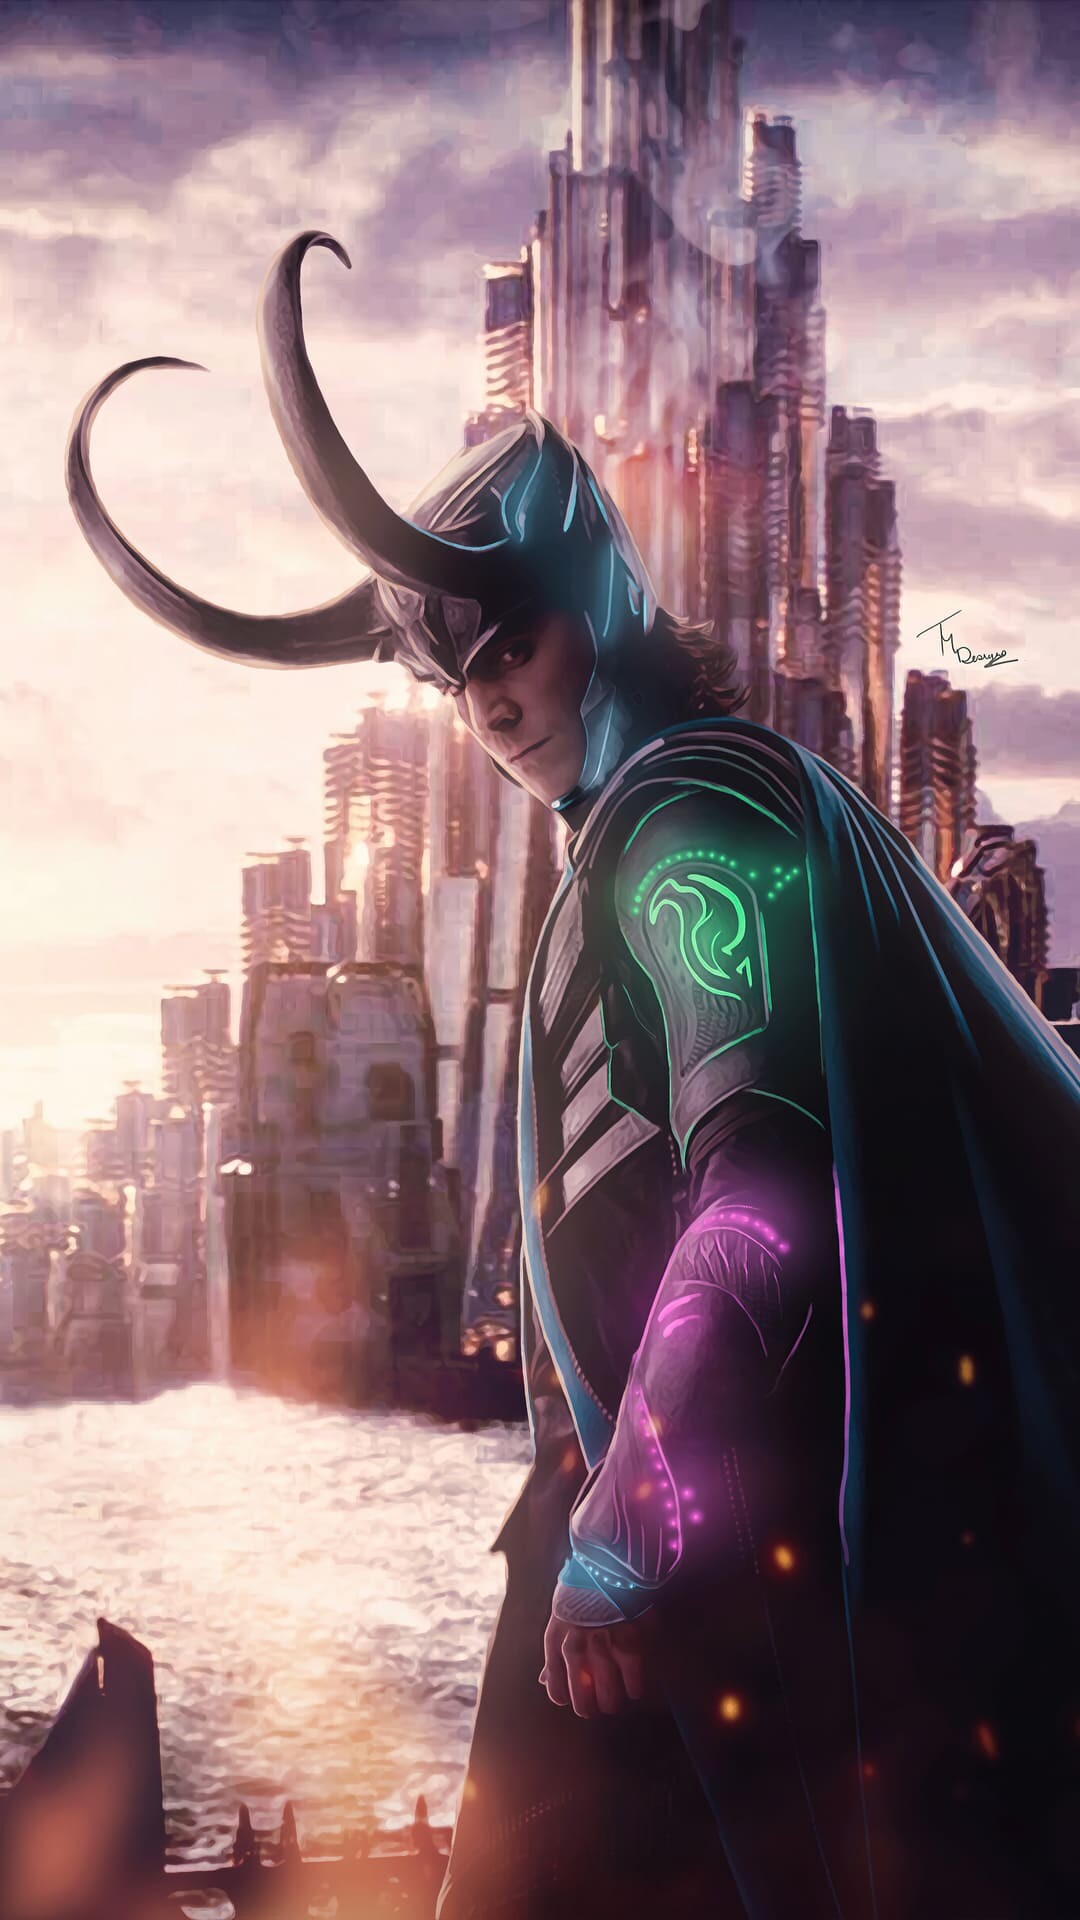 Loki: TV series, Tom Hiddleston reprises his role from the film series. 1080x1920 Full HD Background.